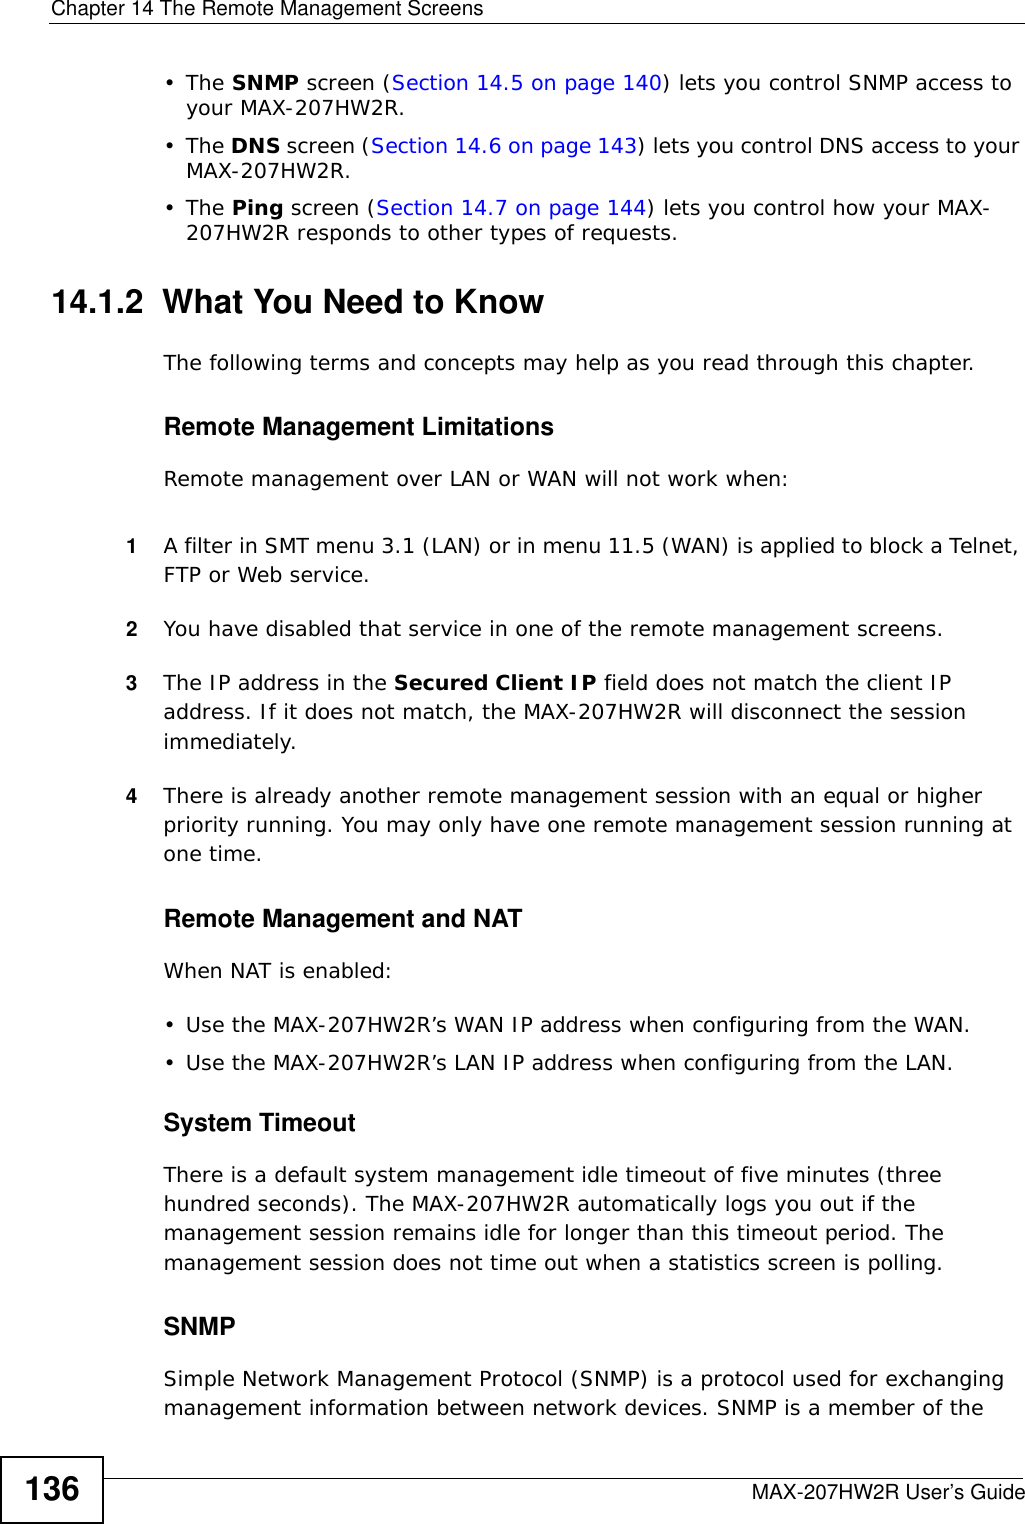 Chapter 14 The Remote Management ScreensMAX-207HW2R User’s Guide136•The SNMP screen (Section 14.5 on page 140) lets you control SNMP access to your MAX-207HW2R.•The DNS screen (Section 14.6 on page 143) lets you control DNS access to your MAX-207HW2R.•The Ping screen (Section 14.7 on page 144) lets you control how your MAX-207HW2R responds to other types of requests.14.1.2  What You Need to KnowThe following terms and concepts may help as you read through this chapter.Remote Management LimitationsRemote management over LAN or WAN will not work when:1A filter in SMT menu 3.1 (LAN) or in menu 11.5 (WAN) is applied to block a Telnet, FTP or Web service. 2You have disabled that service in one of the remote management screens.3The IP address in the Secured Client IP field does not match the client IP address. If it does not match, the MAX-207HW2R will disconnect the session immediately.4There is already another remote management session with an equal or higher priority running. You may only have one remote management session running at one time.Remote Management and NATWhen NAT is enabled:• Use the MAX-207HW2R’s WAN IP address when configuring from the WAN. • Use the MAX-207HW2R’s LAN IP address when configuring from the LAN.System TimeoutThere is a default system management idle timeout of five minutes (three hundred seconds). The MAX-207HW2R automatically logs you out if the management session remains idle for longer than this timeout period. The management session does not time out when a statistics screen is polling.SNMPSimple Network Management Protocol (SNMP) is a protocol used for exchanging management information between network devices. SNMP is a member of the 